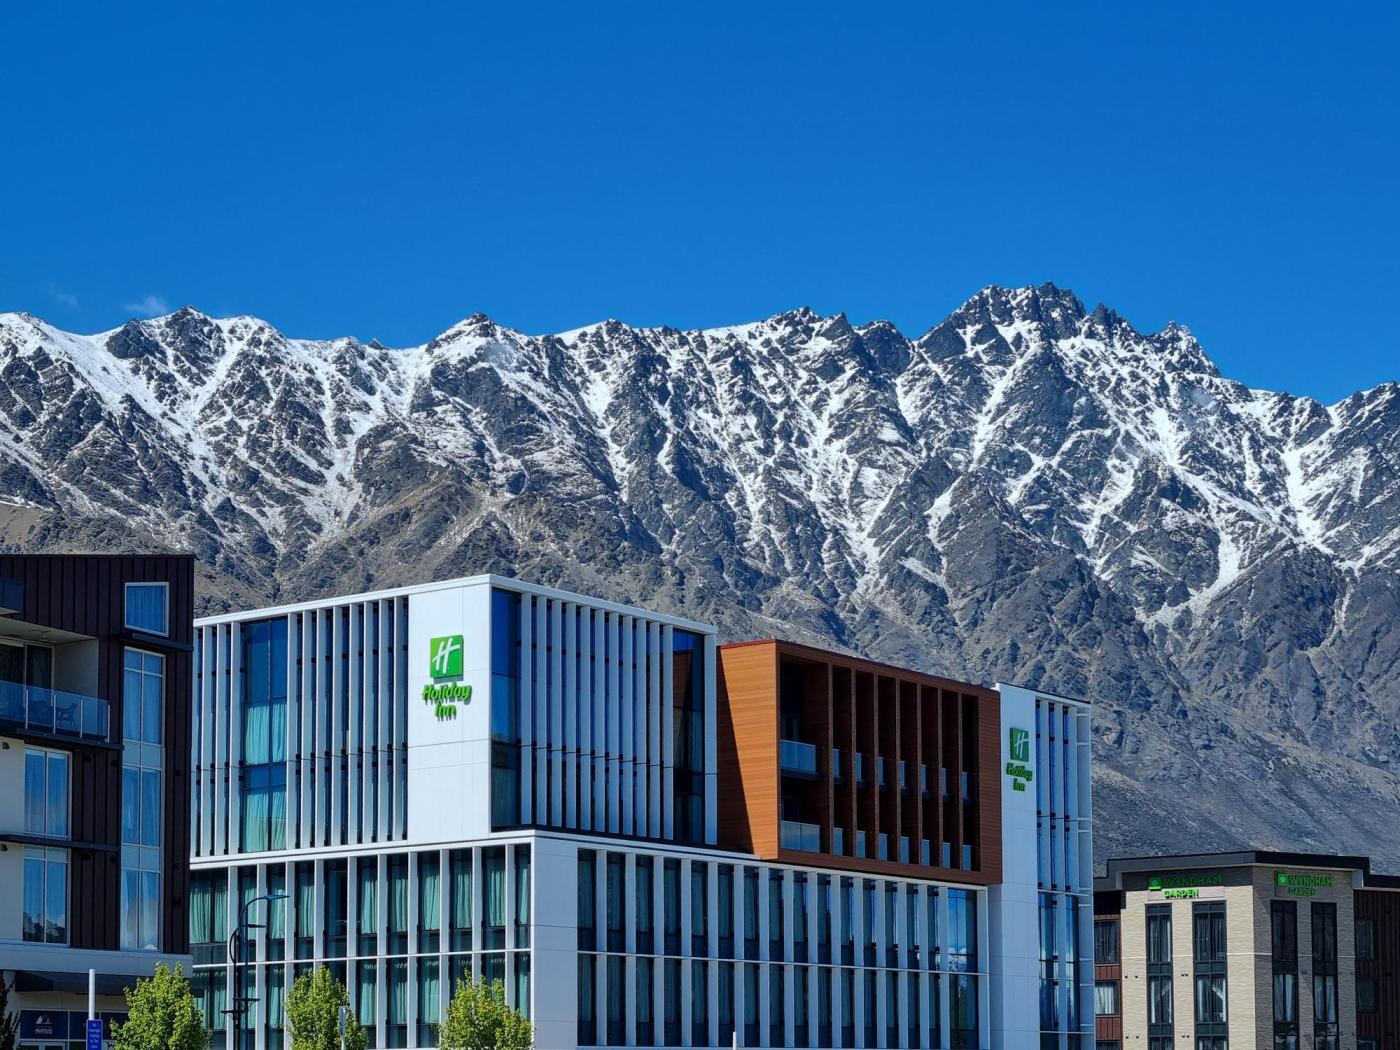 Holiday Inn Remarkables Park infront of a snow covered mountain